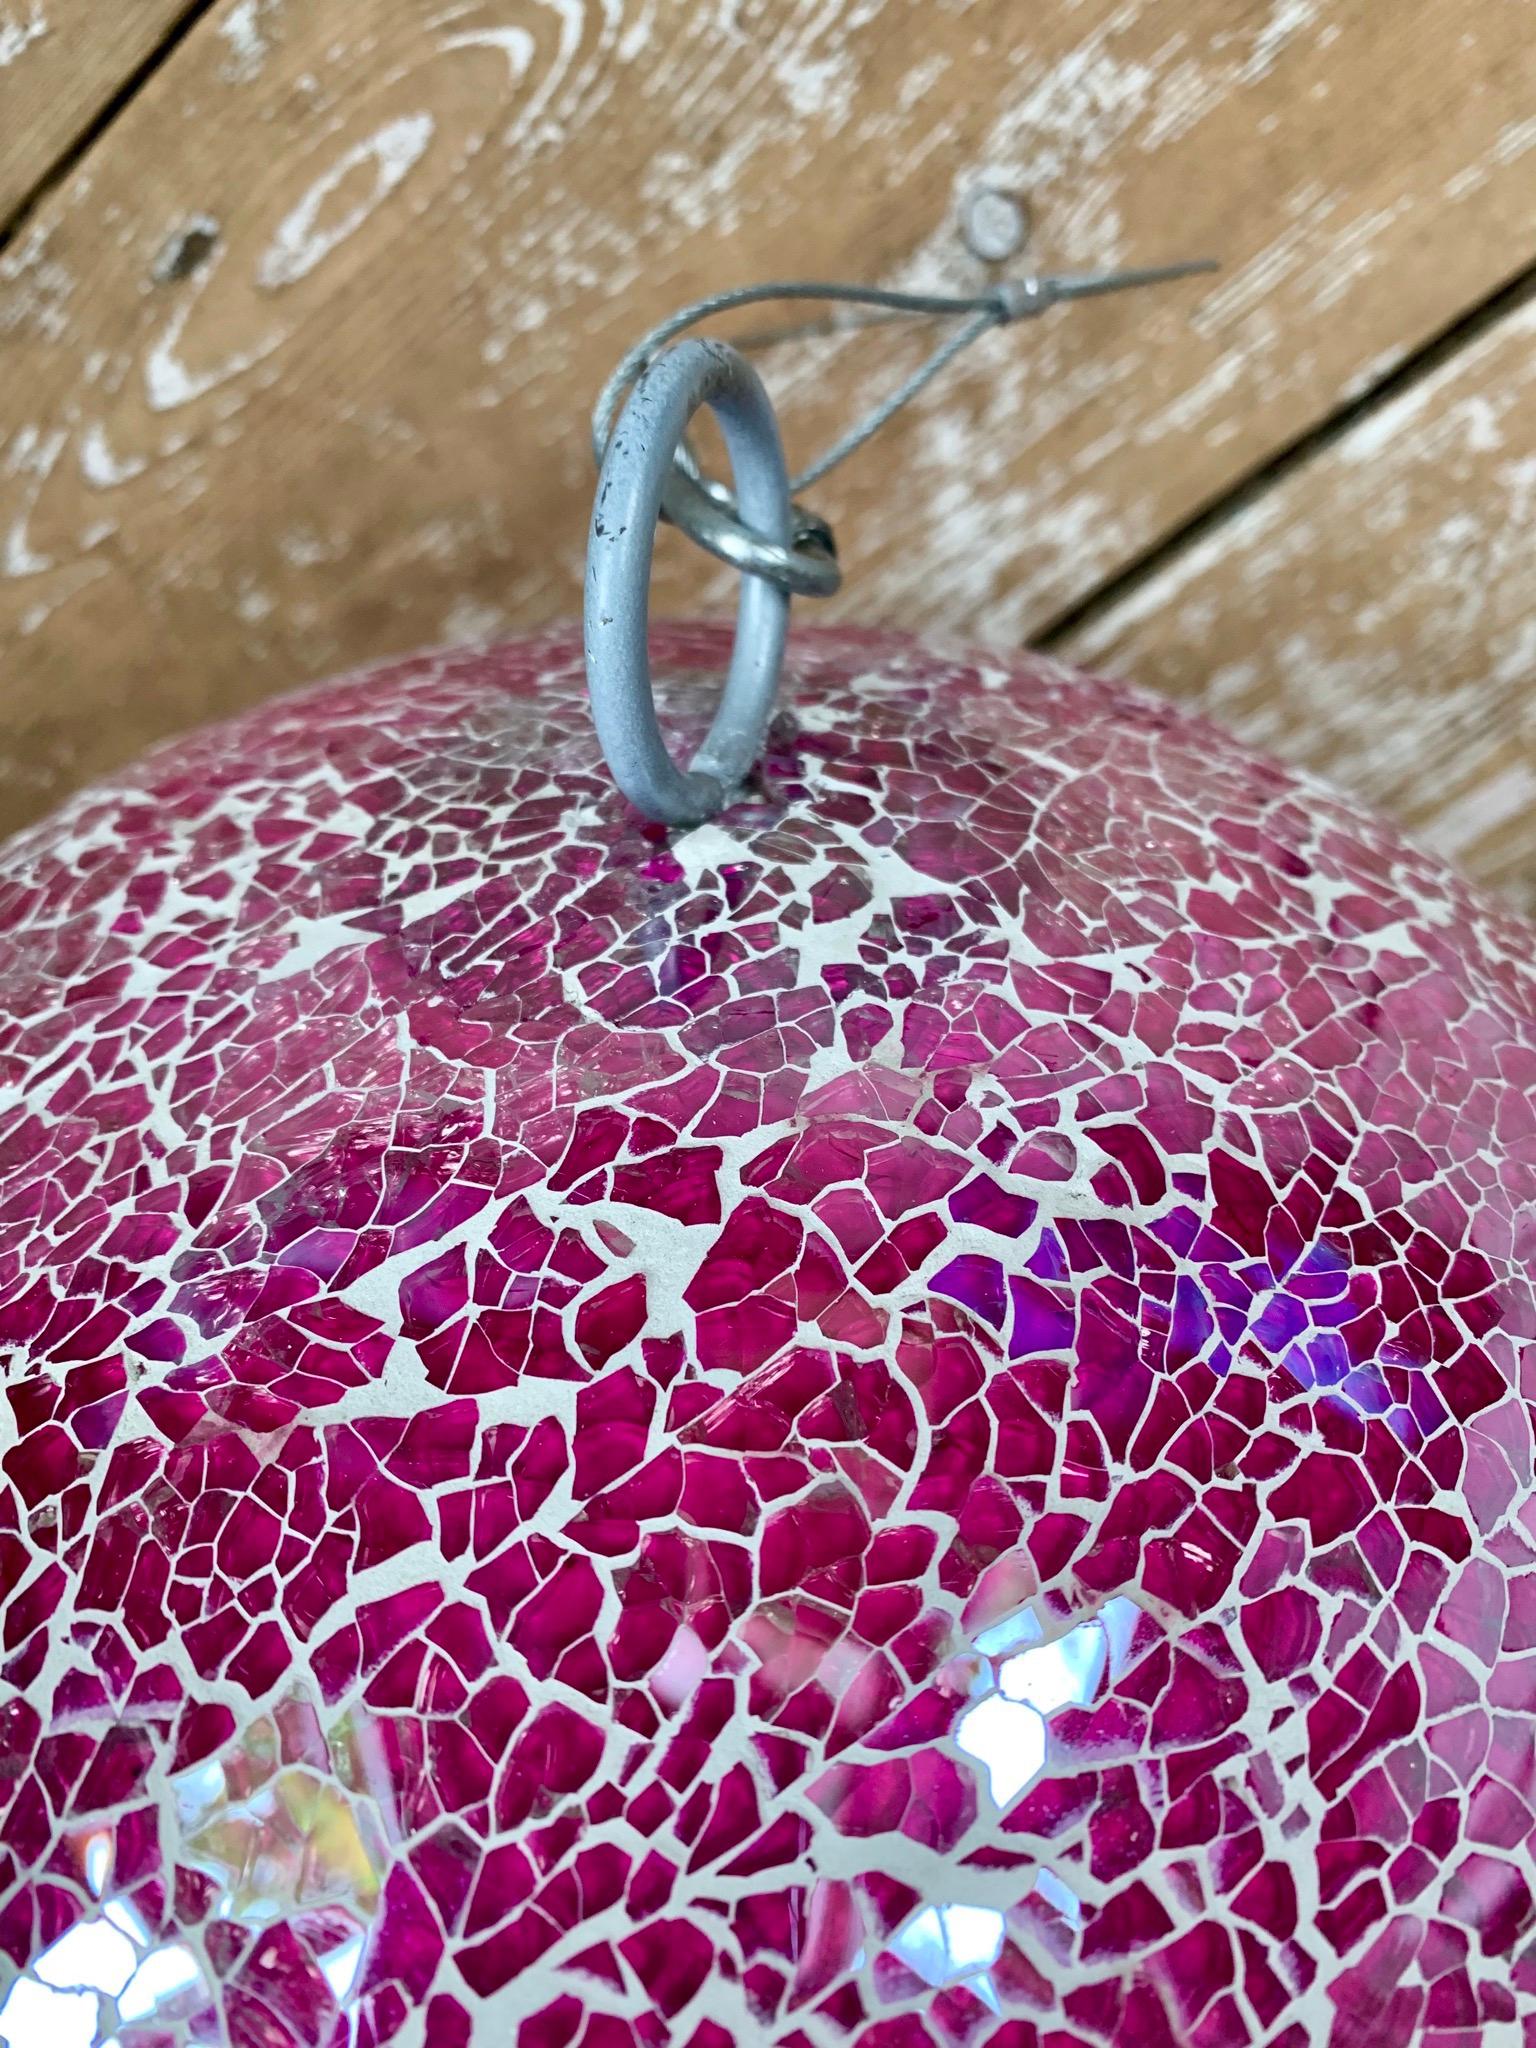 This large glitter ball was used as part of London Christmas tree celebration. It was probably used to adorn the Christmas tree in Trafalgar Square.
These were made especially for this commission.
     